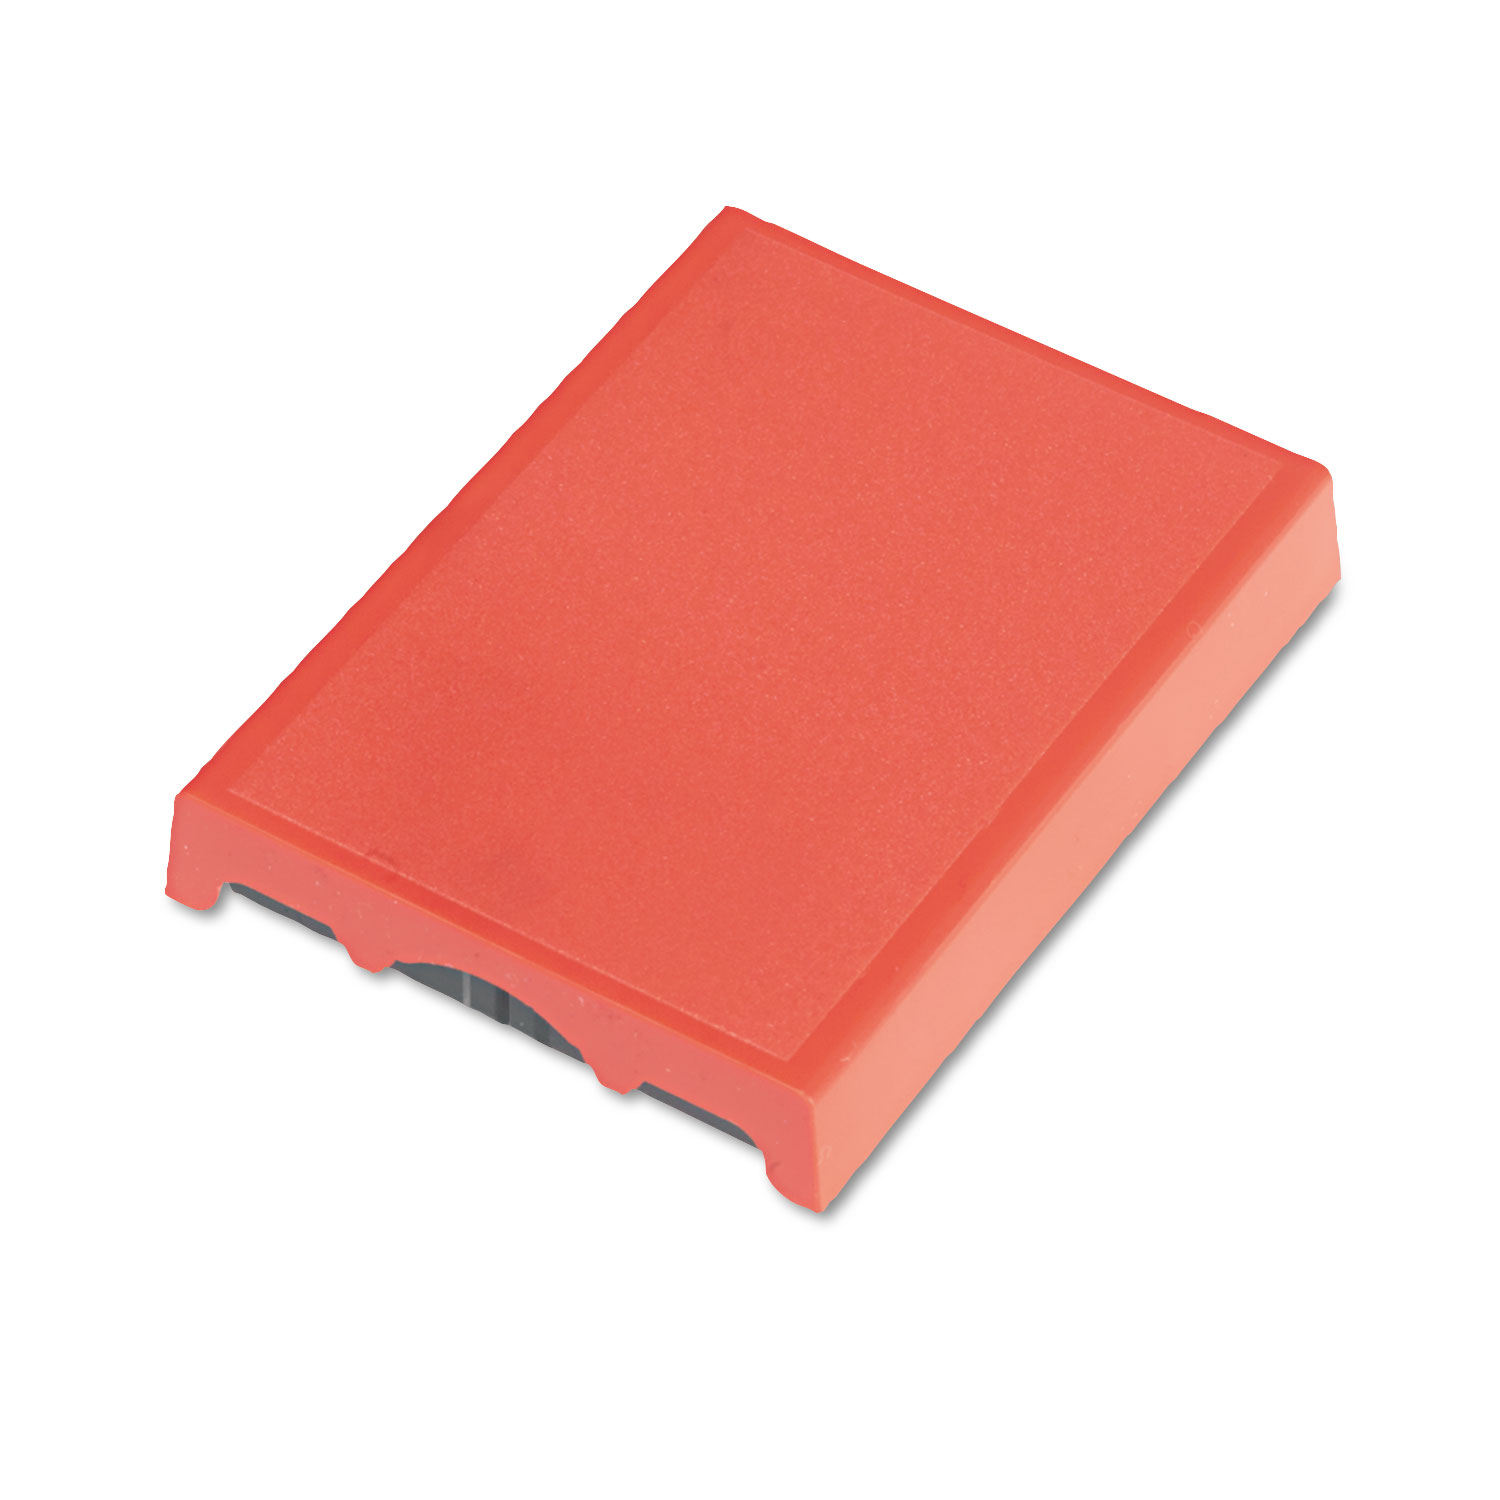 Trodat T4729 Dater Replacement Pad, 1 9/16 x 2, Red